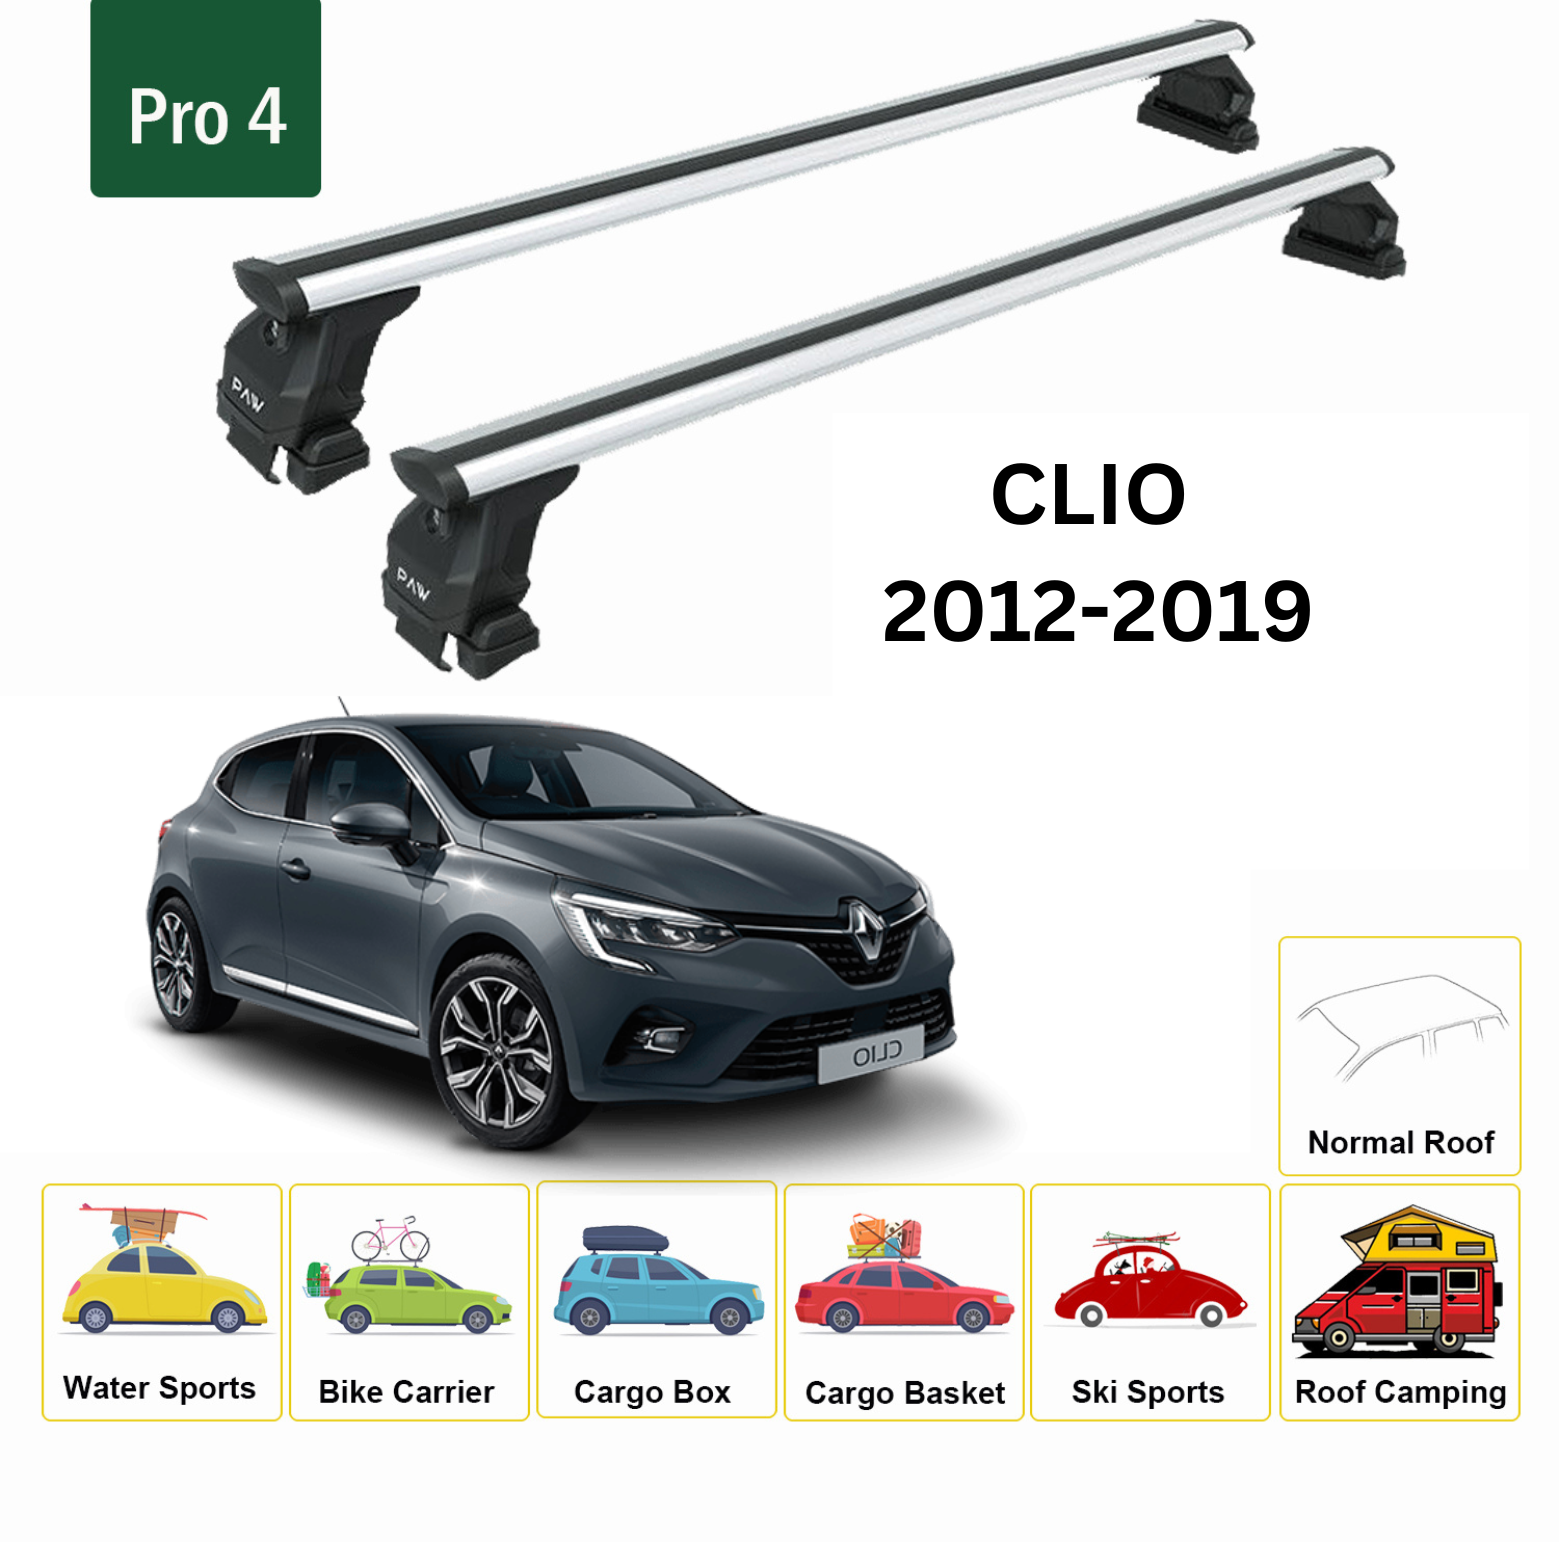 For Renault Clio 2012-2019 Roof Rack System, Aluminium Cross Bar, Metal Bracket, Normal Roof, Silver